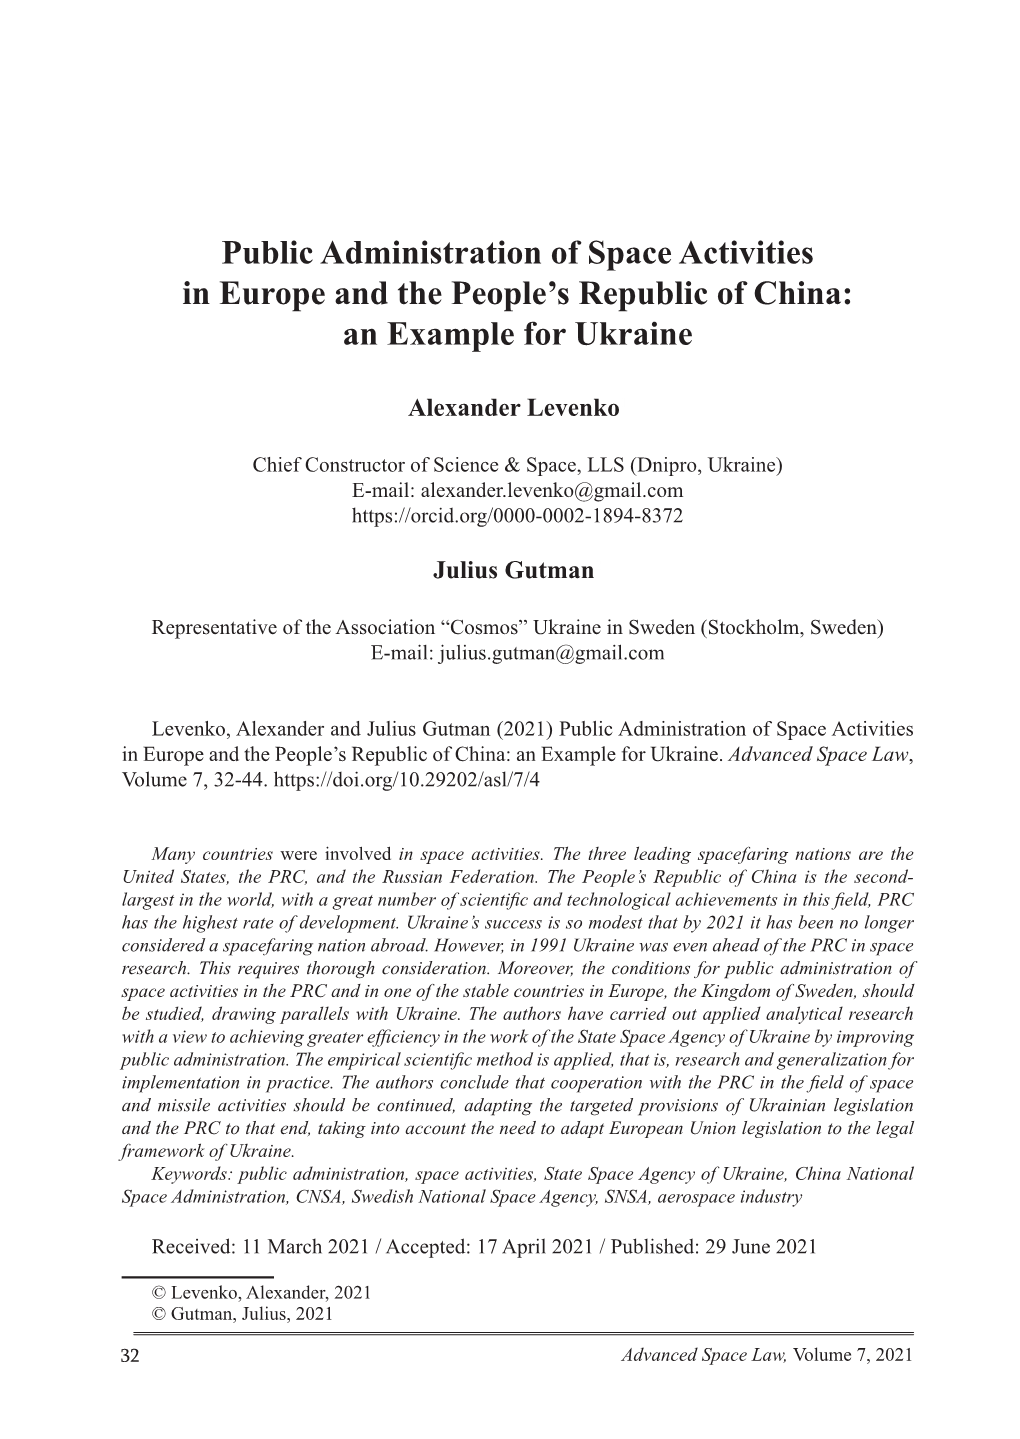 Public Administration of Space Activities in Europe and the People's